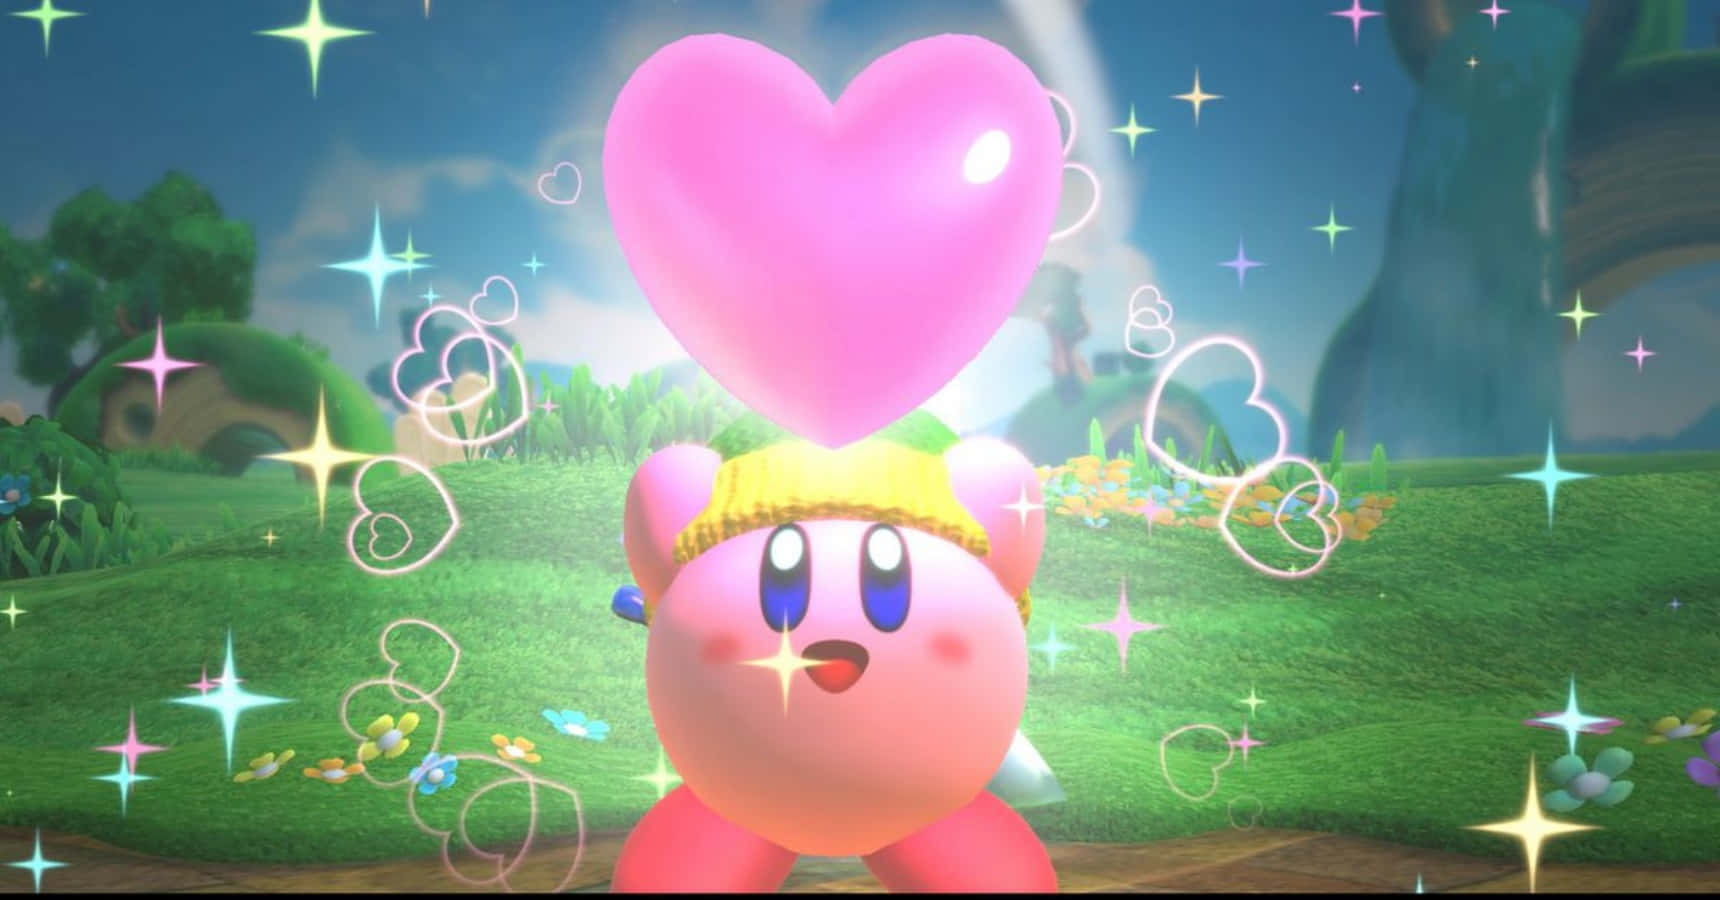 Kirby the pink puffball is ready for battle